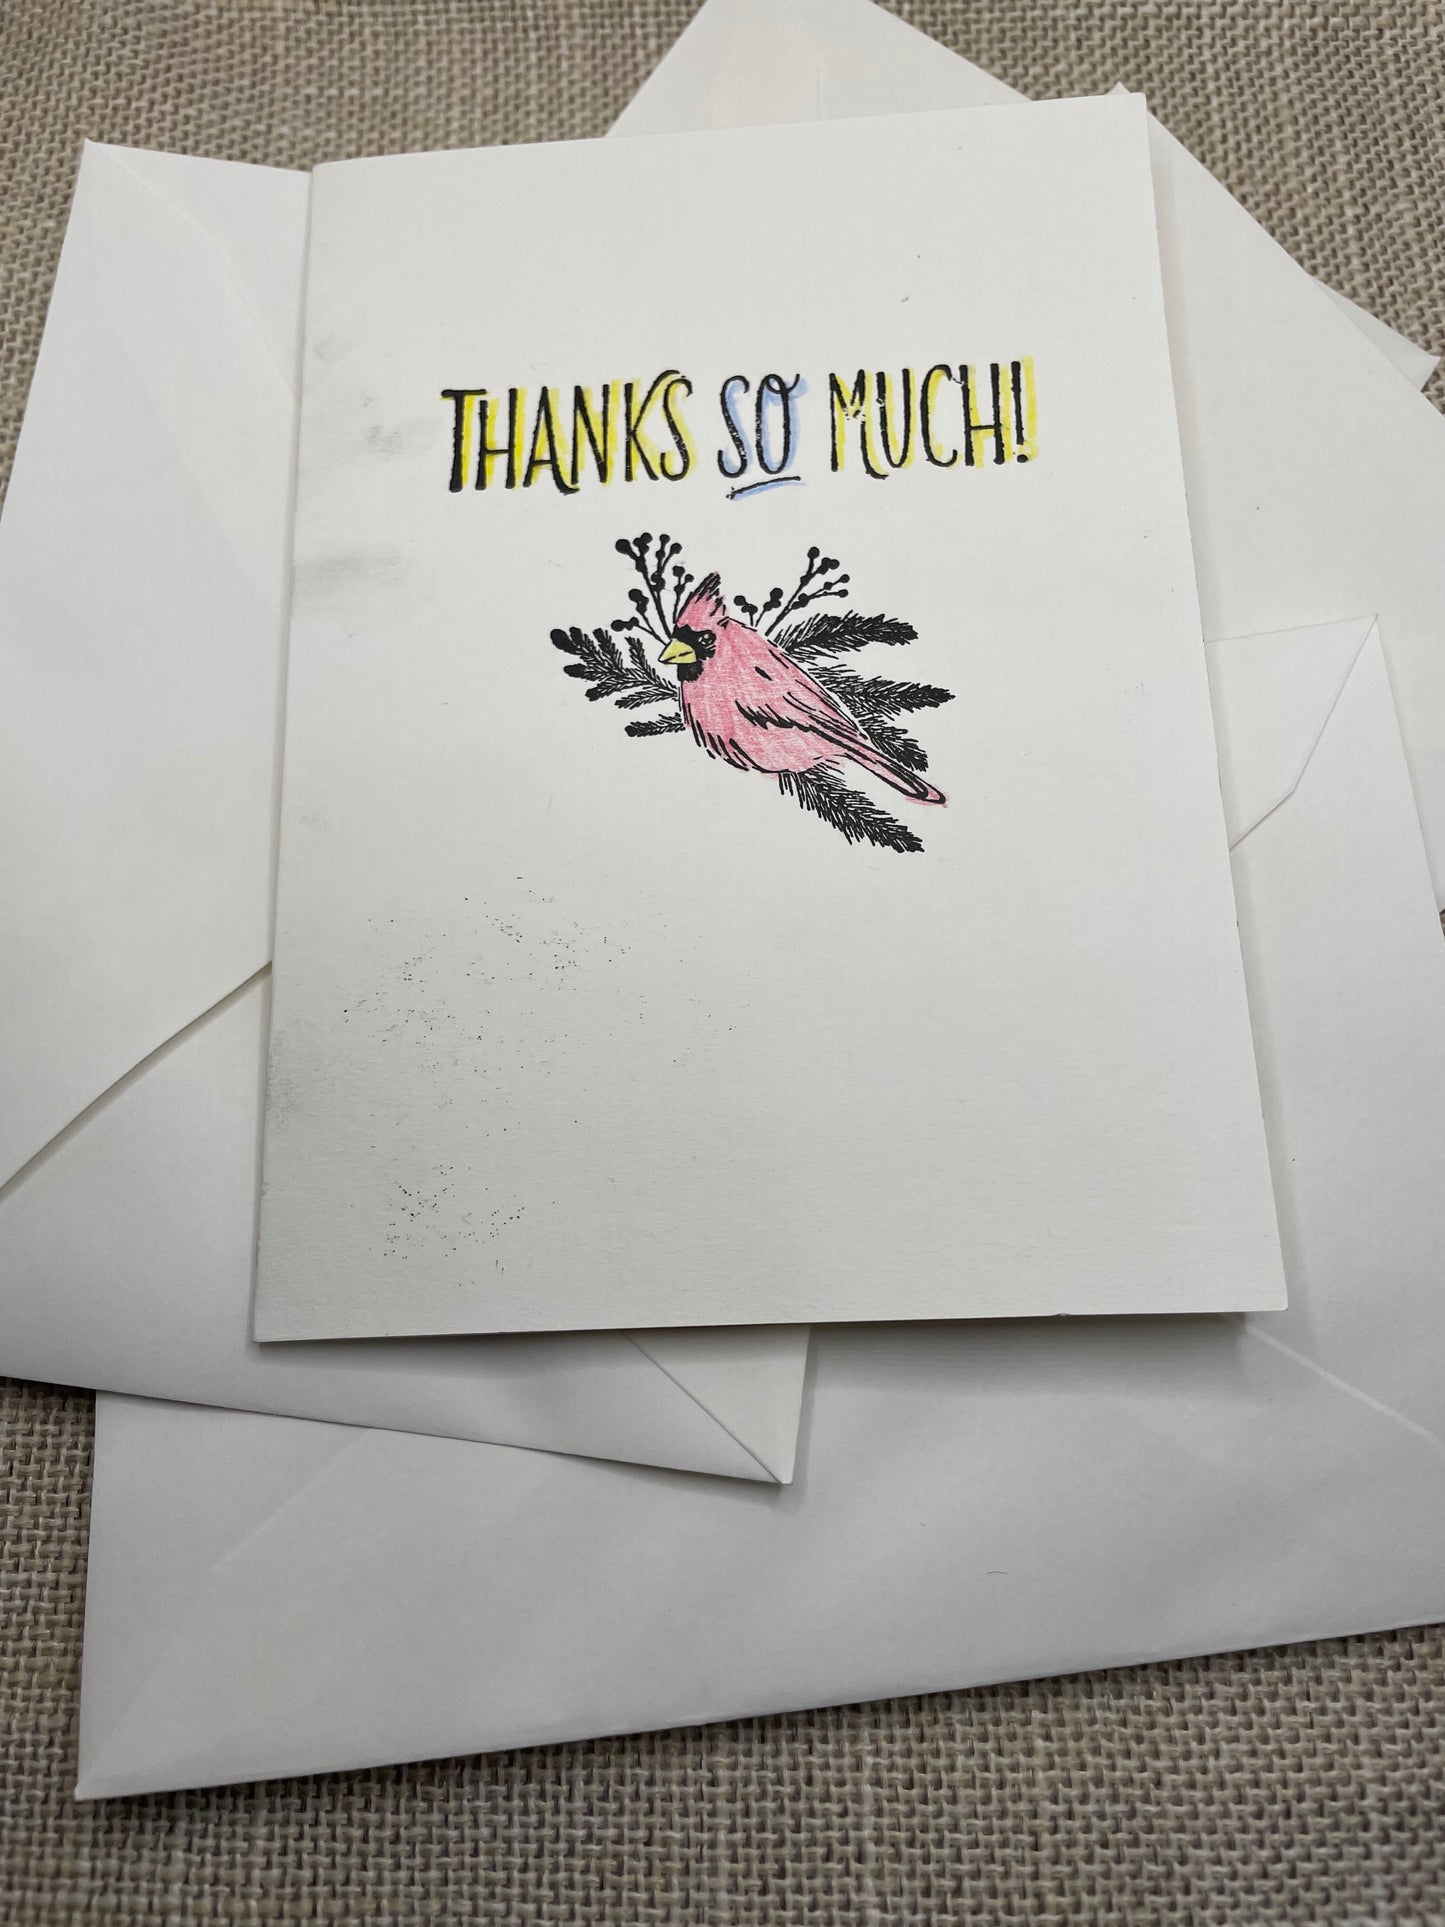 Handcrafted Blank Thank You Cards (Set of 5)